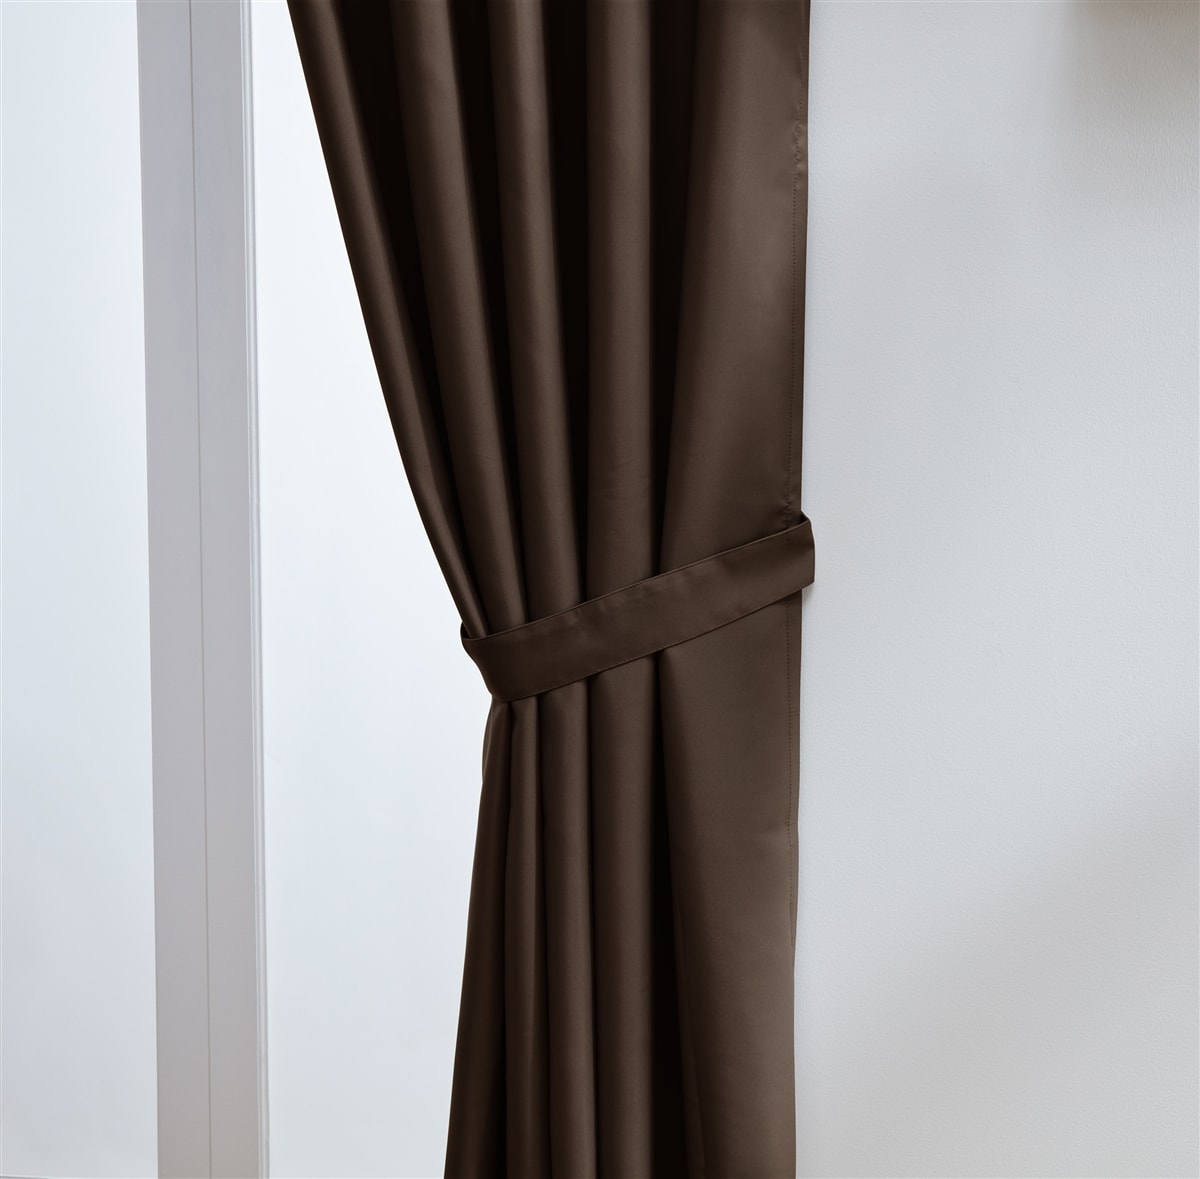 Thermal Blackout Ready Made Eyelet Curtains + Tie Backs (Chocolate)